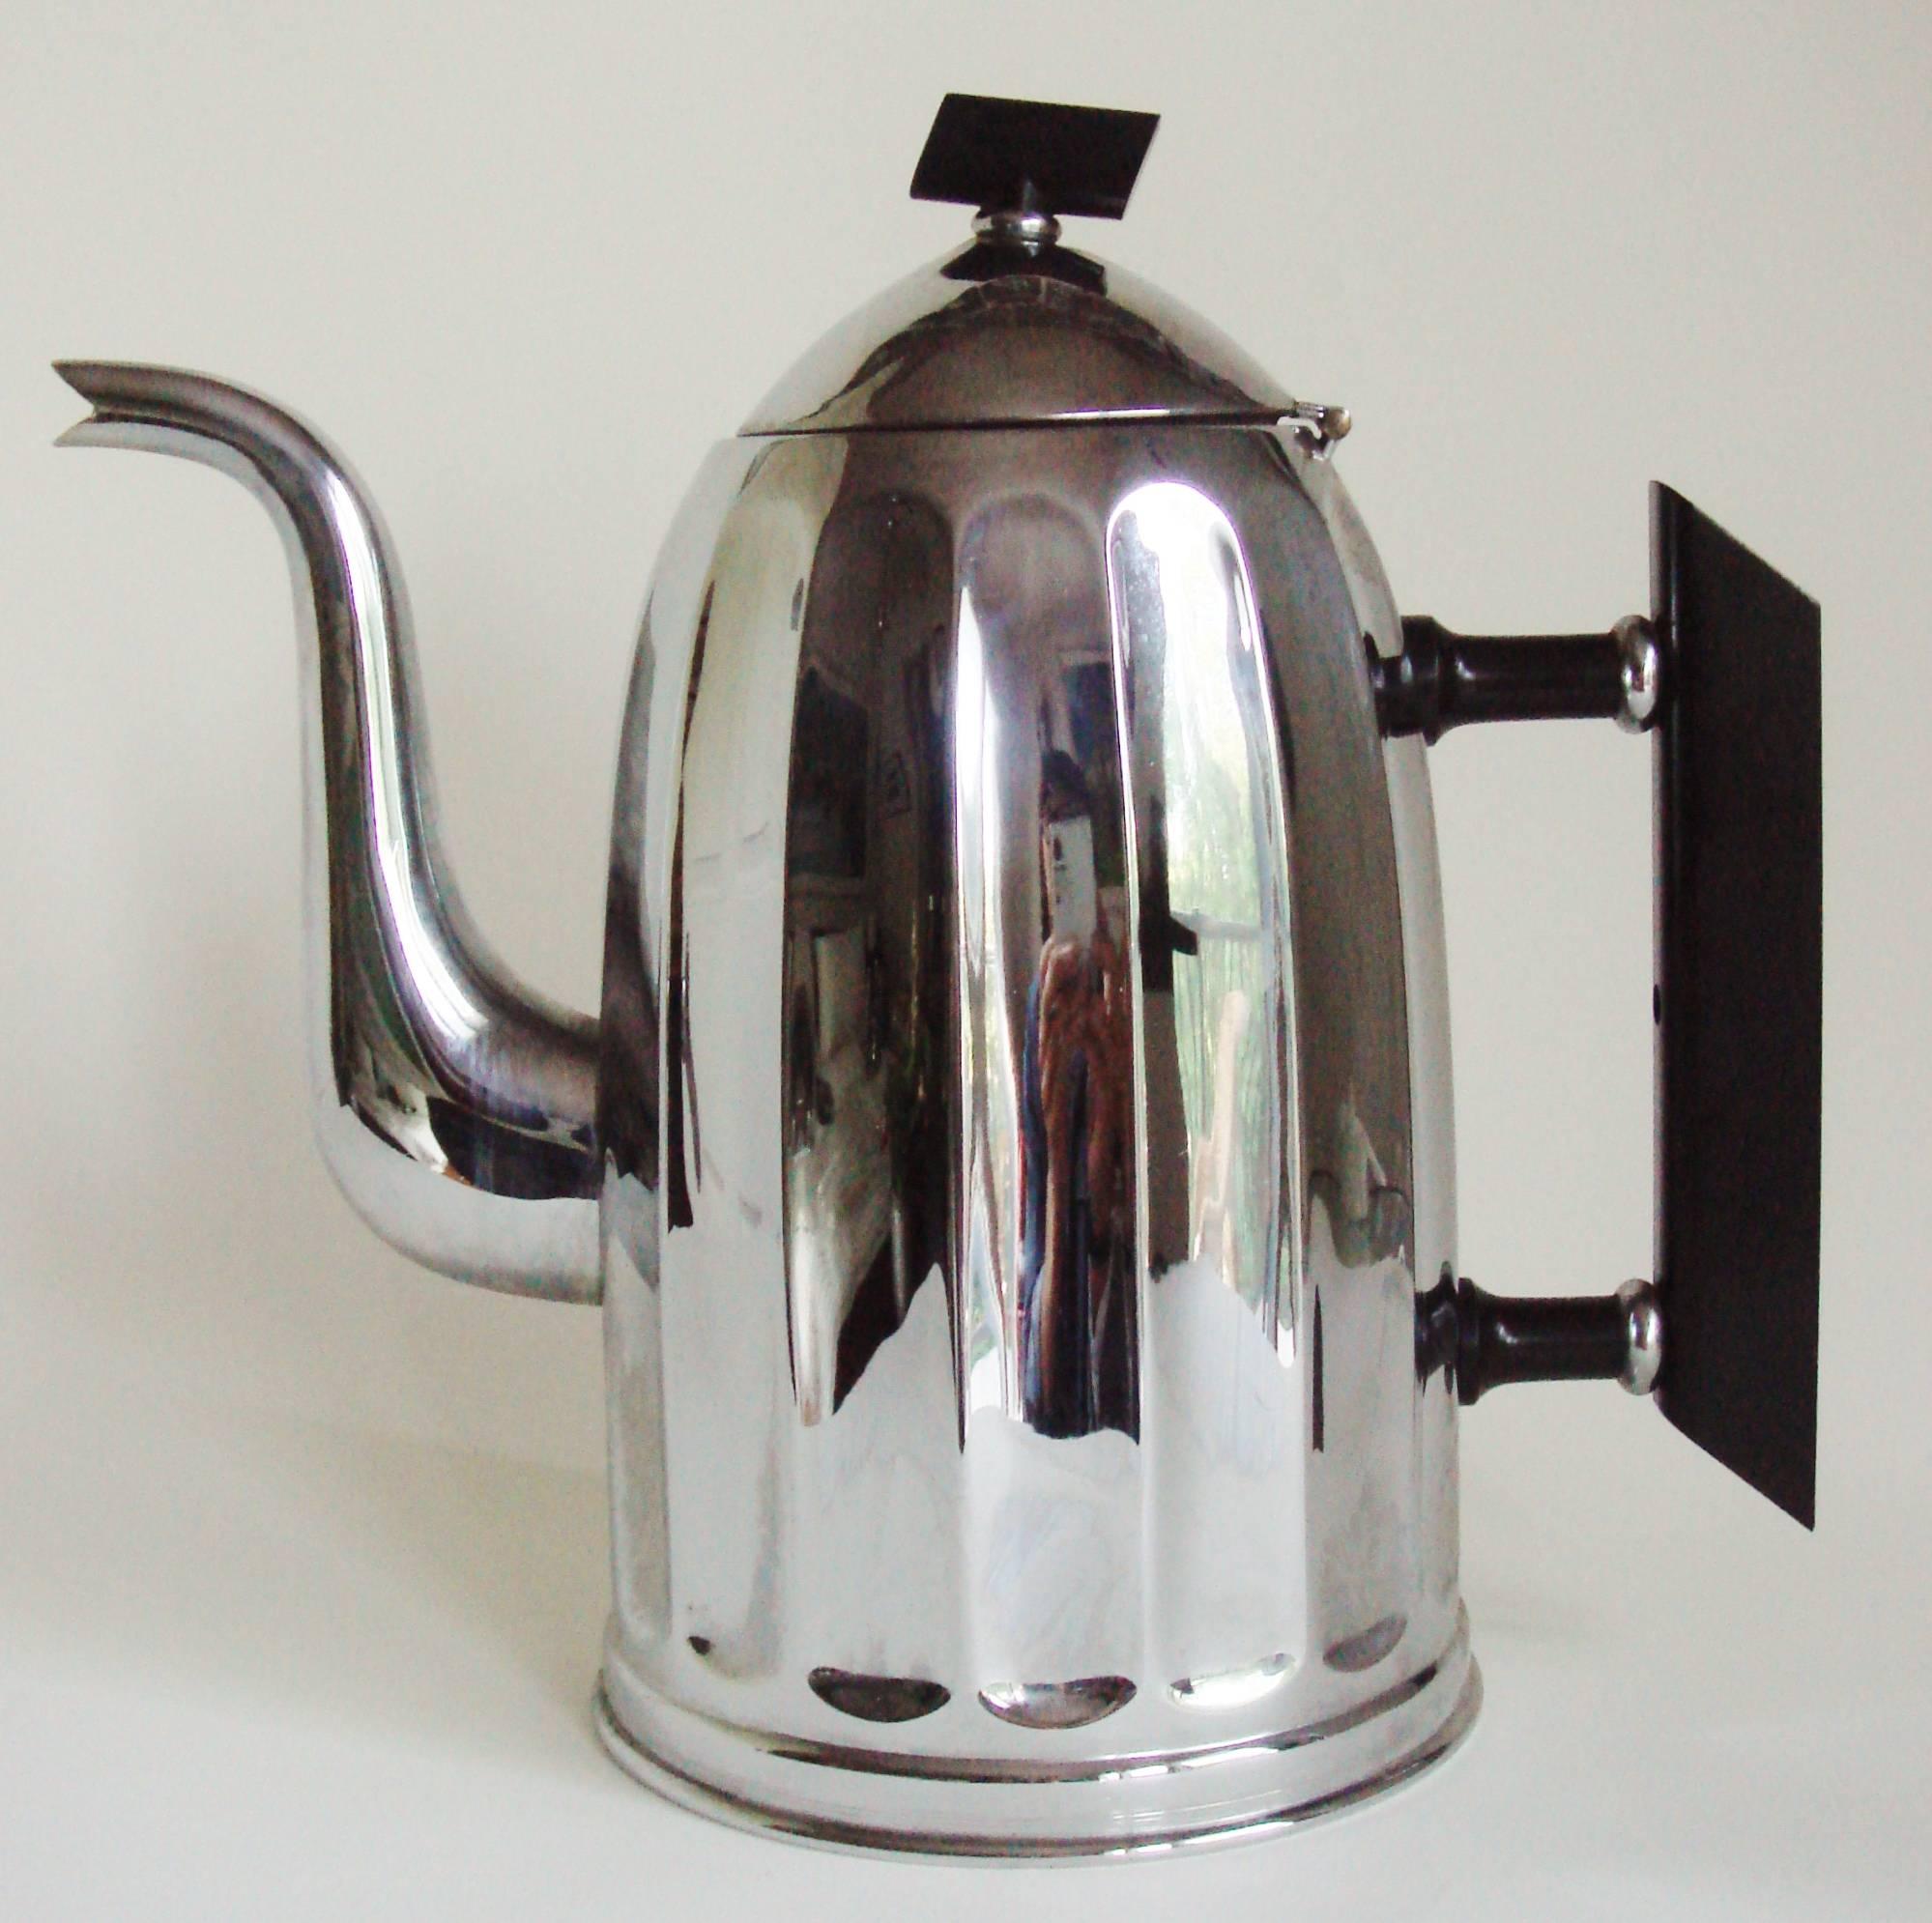 This iconic Art Deco chrome and black bakelite coffee set is by the famous Belgian metal ware company, Demeyere. The set features a large coffee pot (9.5